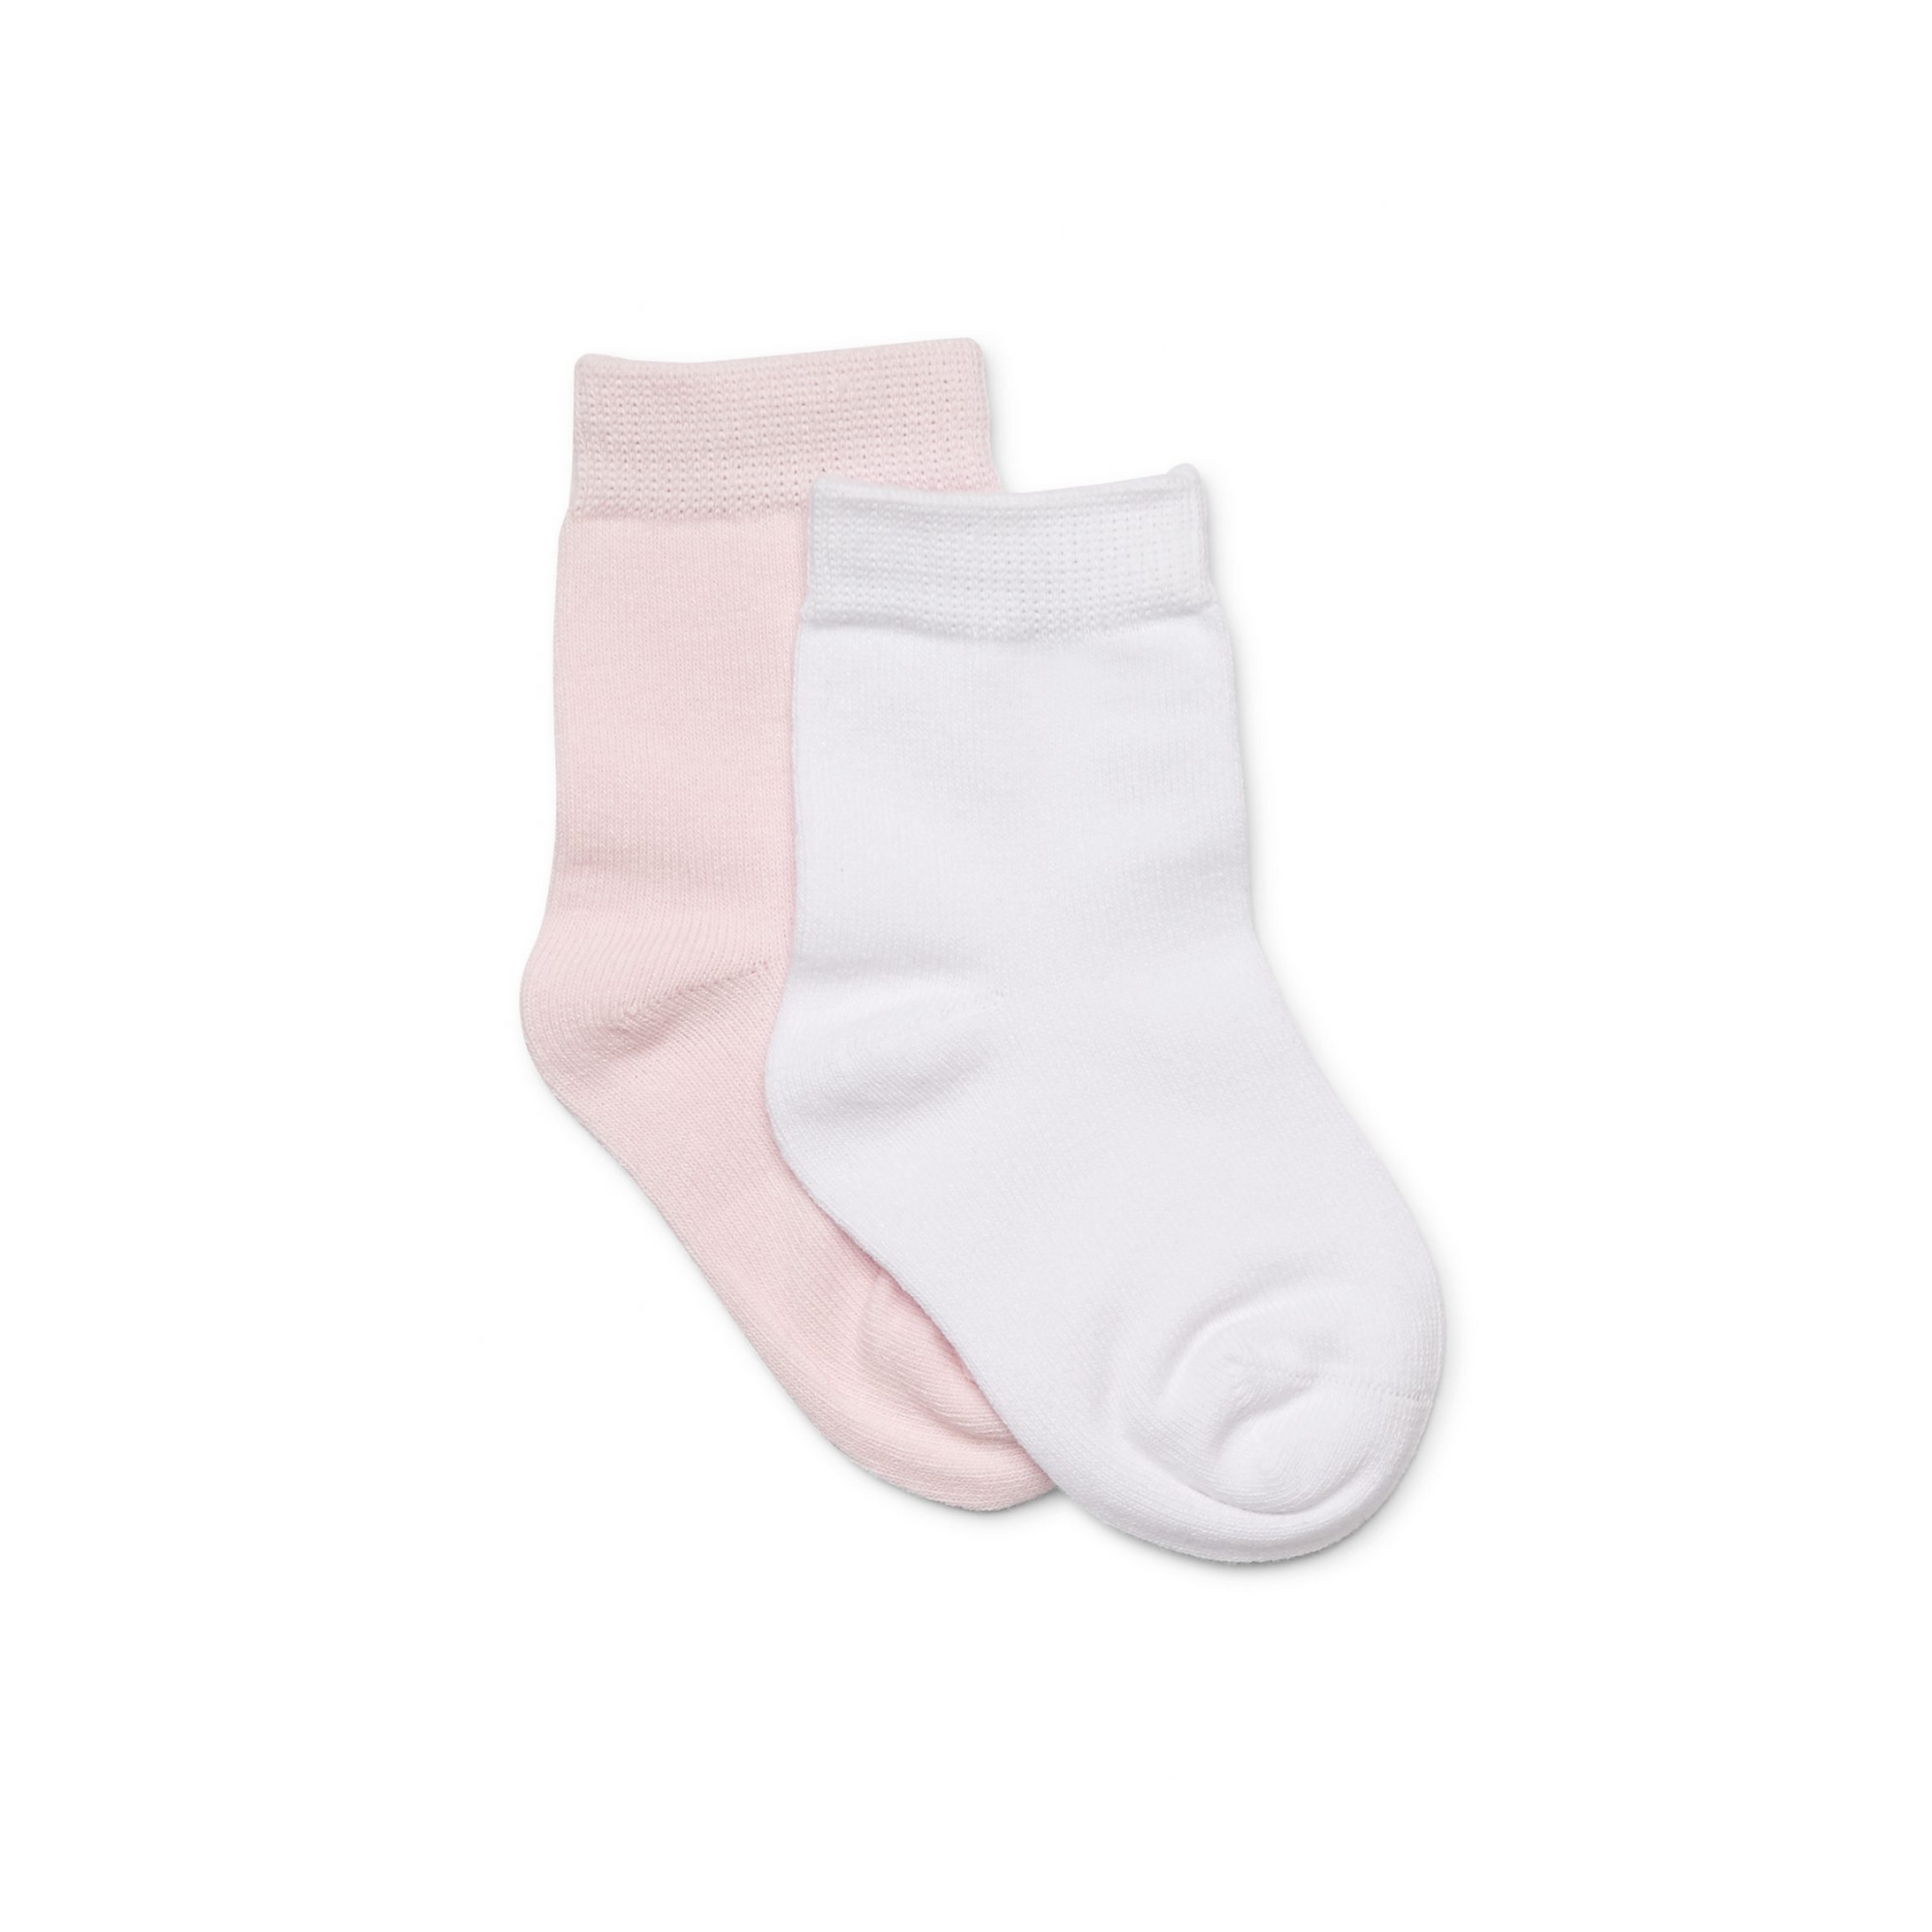 Marquise Girls 2 Pack Pink and White Socks